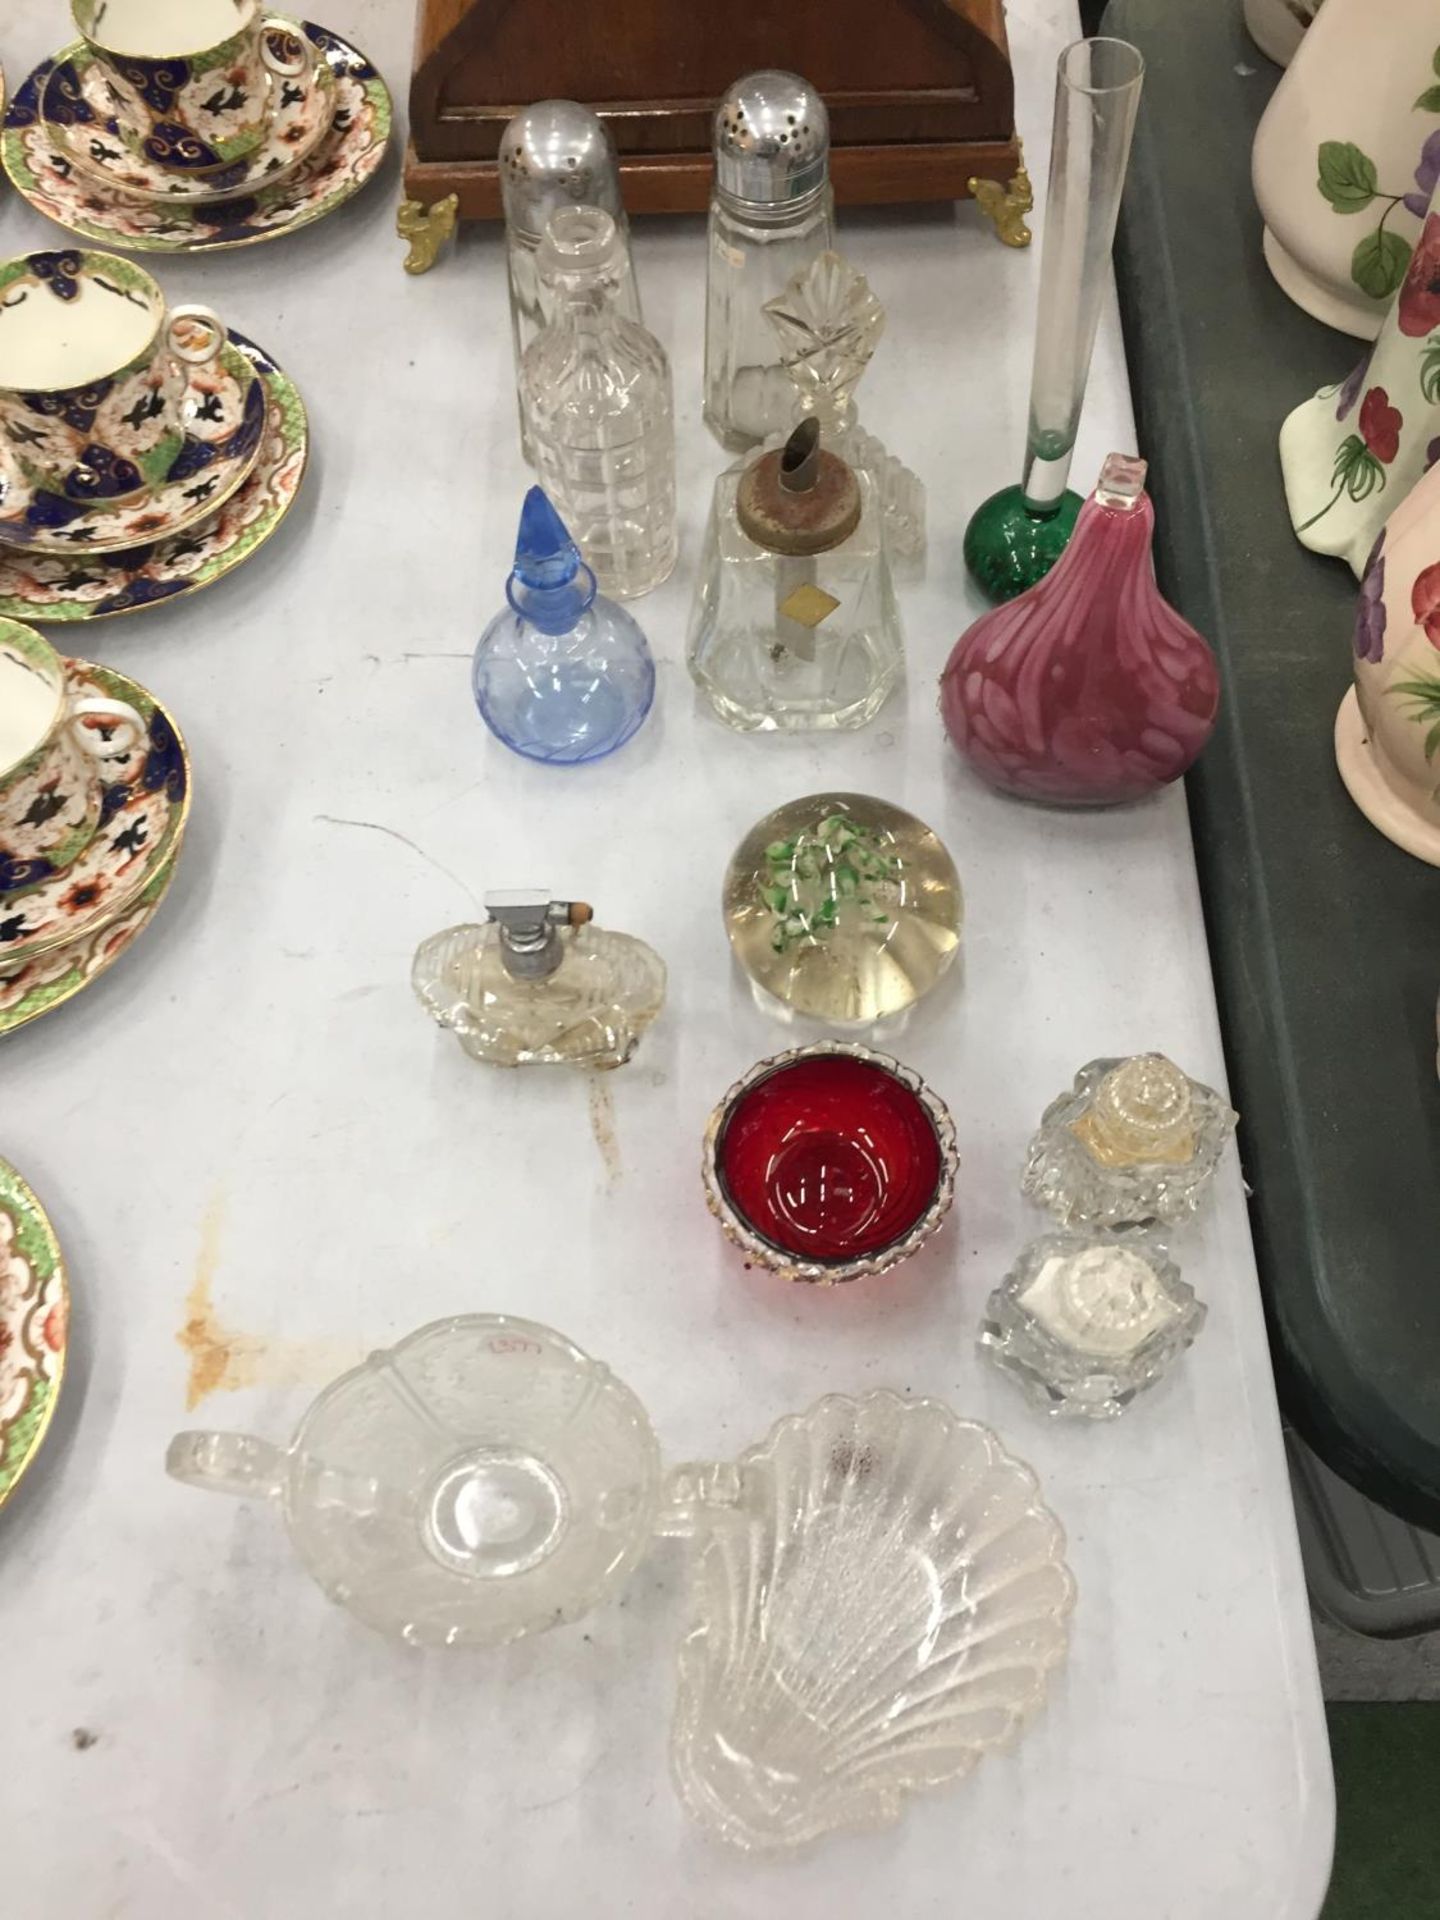 A COLLECTION OF VINTAGE GLASSWARE TO INCLUDE SCENT BOTTLES, CRUET SET, SUGARSHAKERS, A